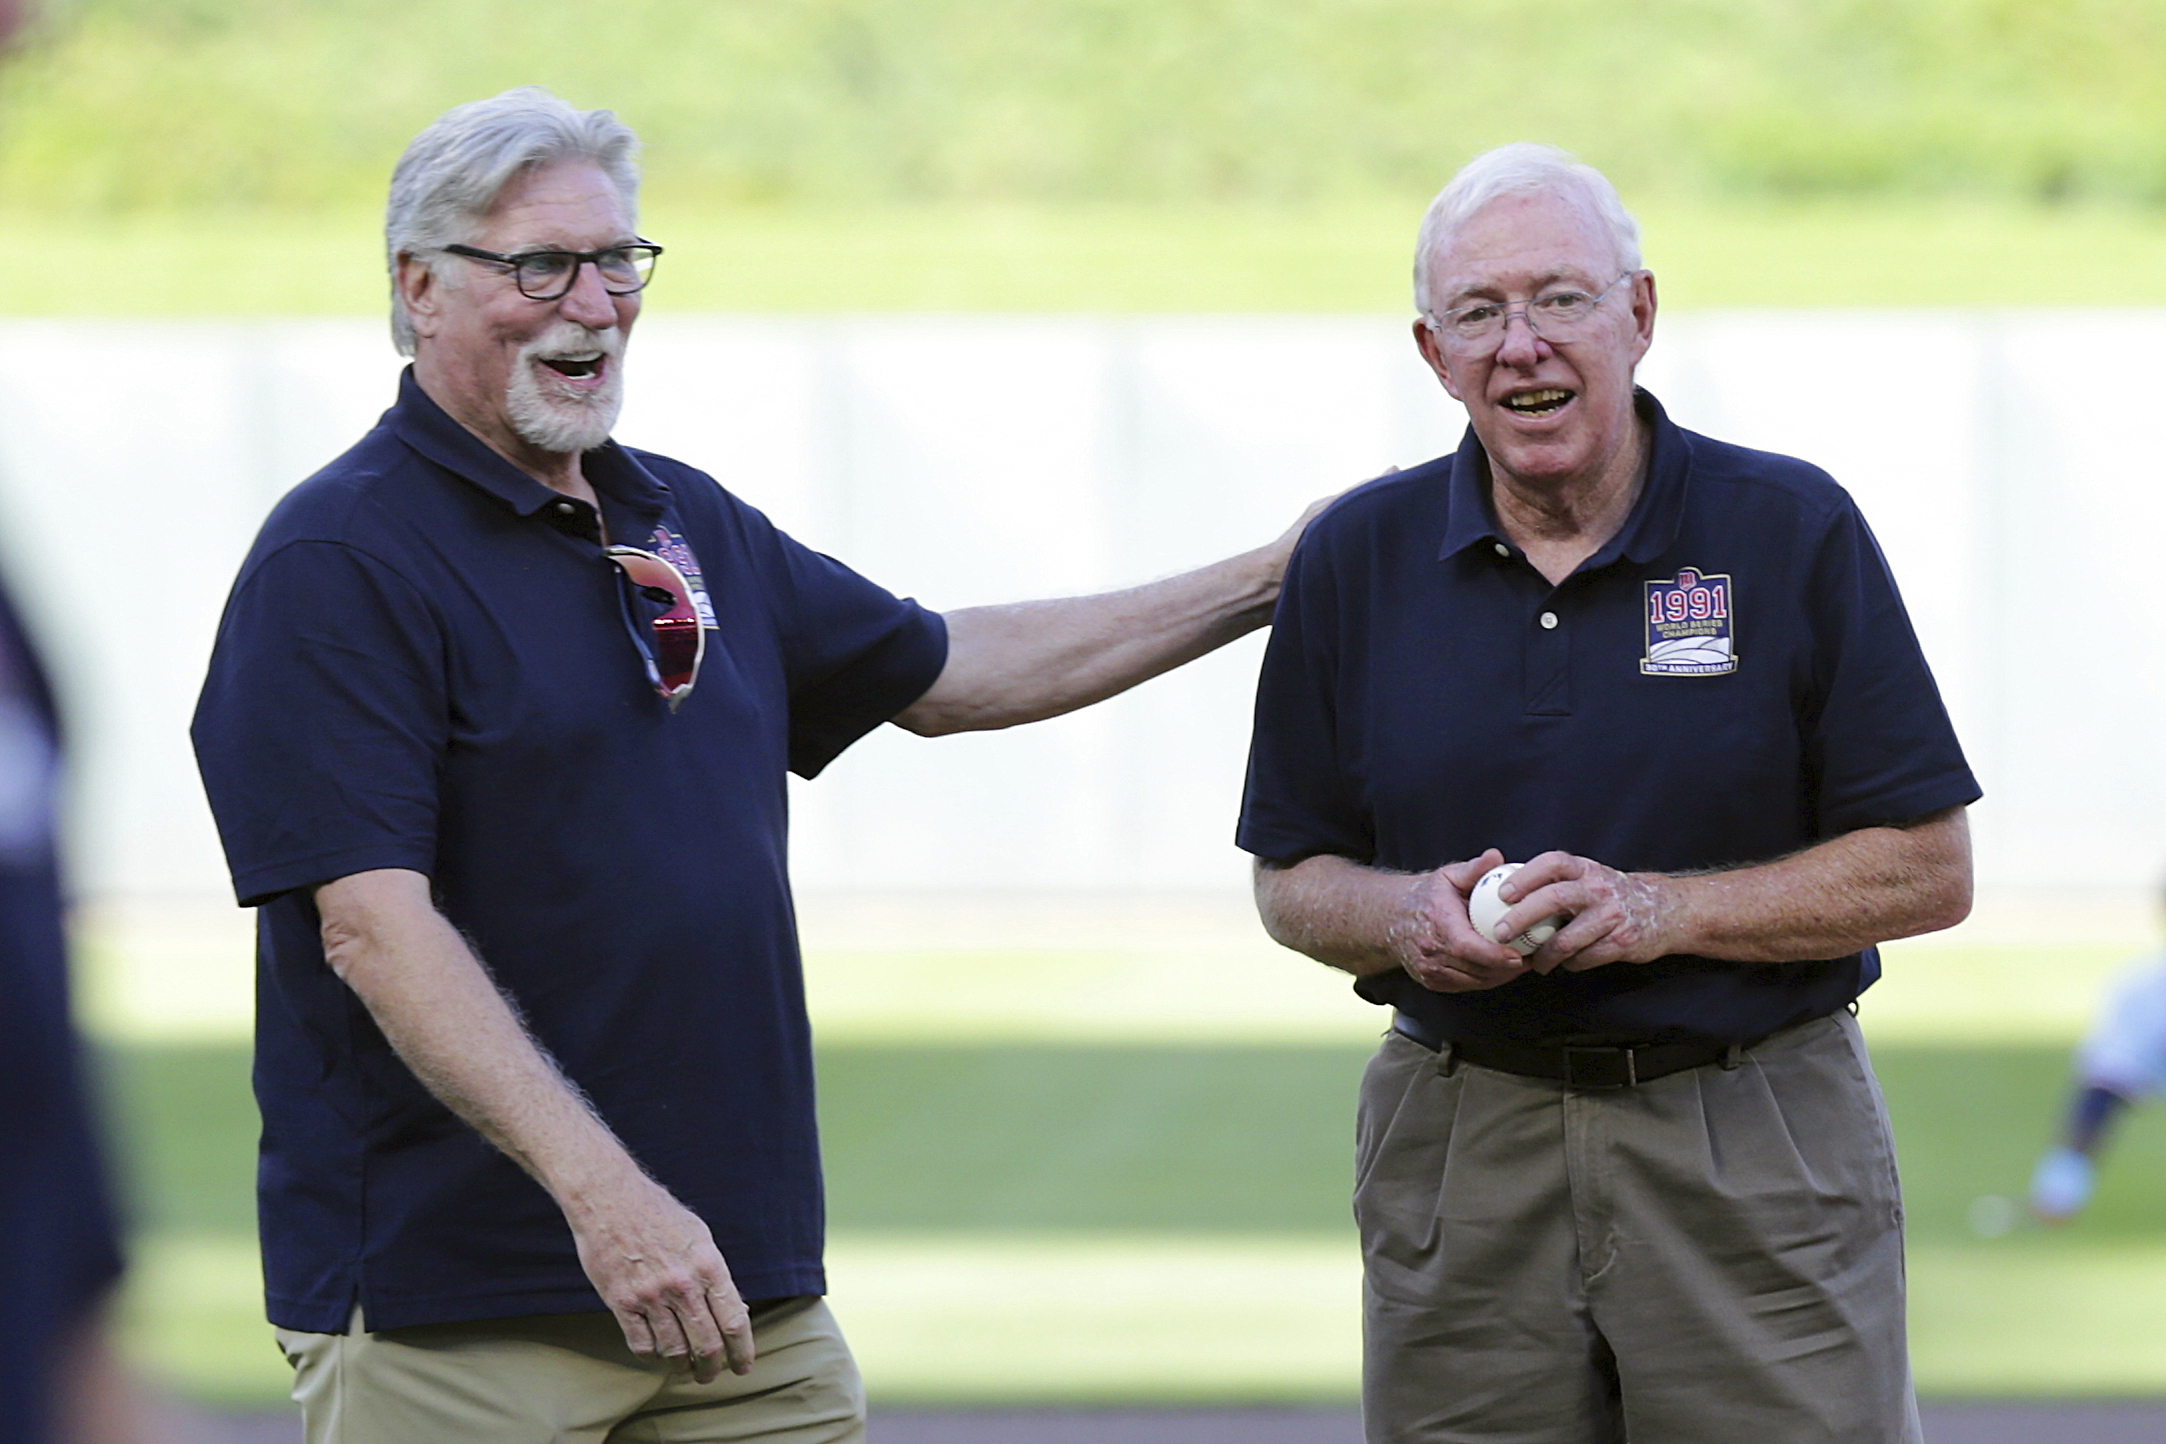 Tigers analyst Jack Morris suspended for comment involving Shohei